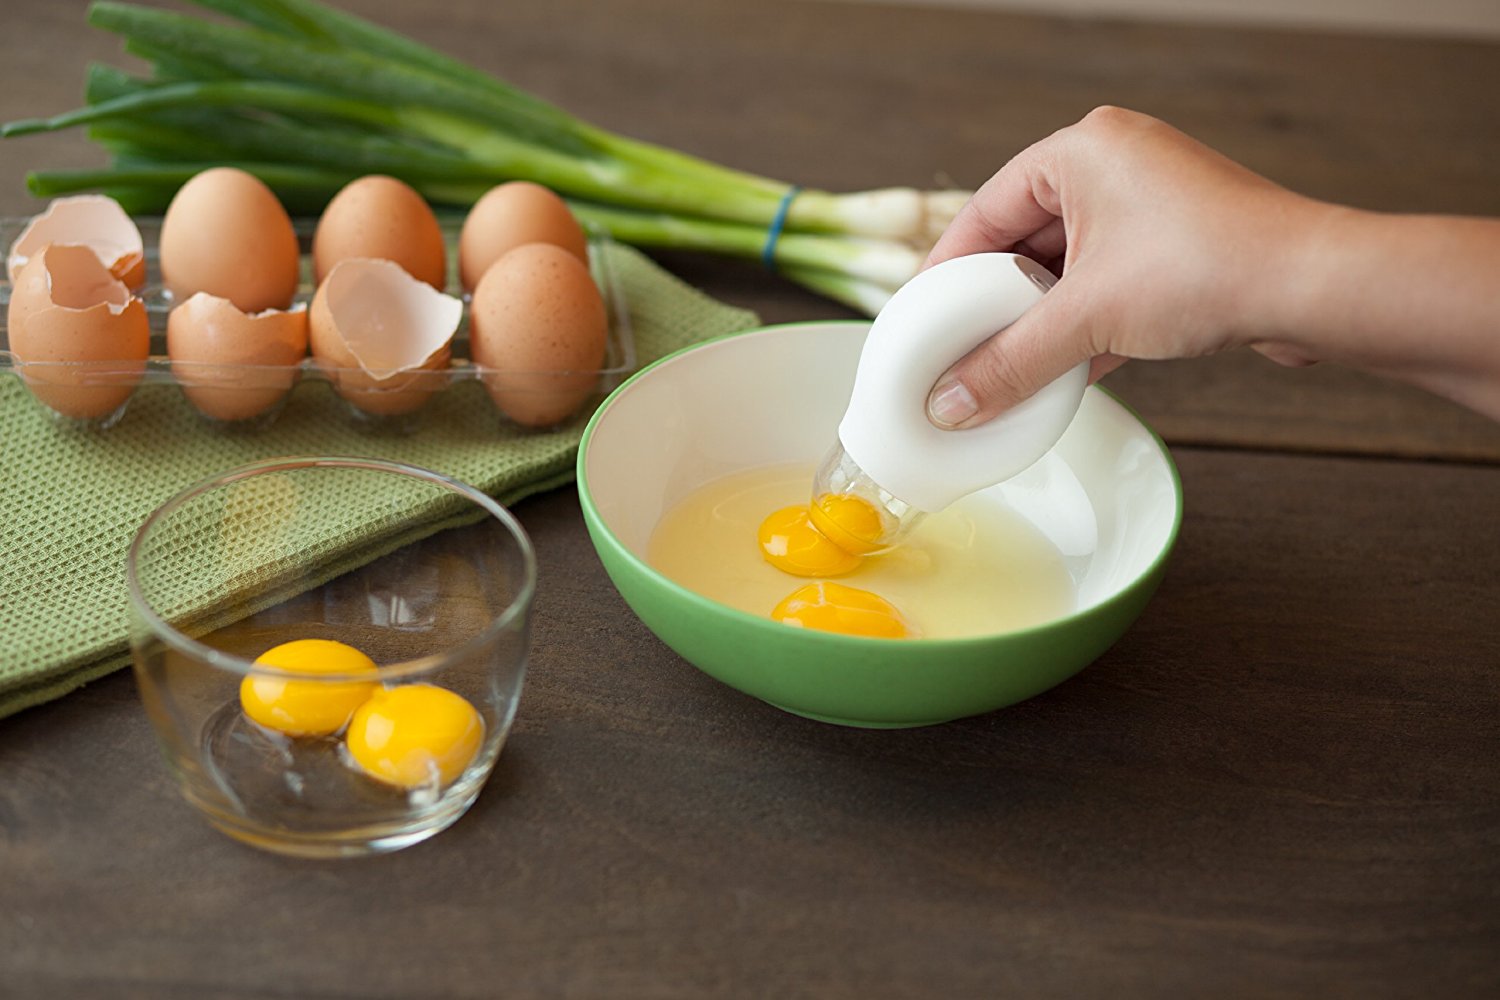 Quirky's "Pluck" yolk extractor. ($6)